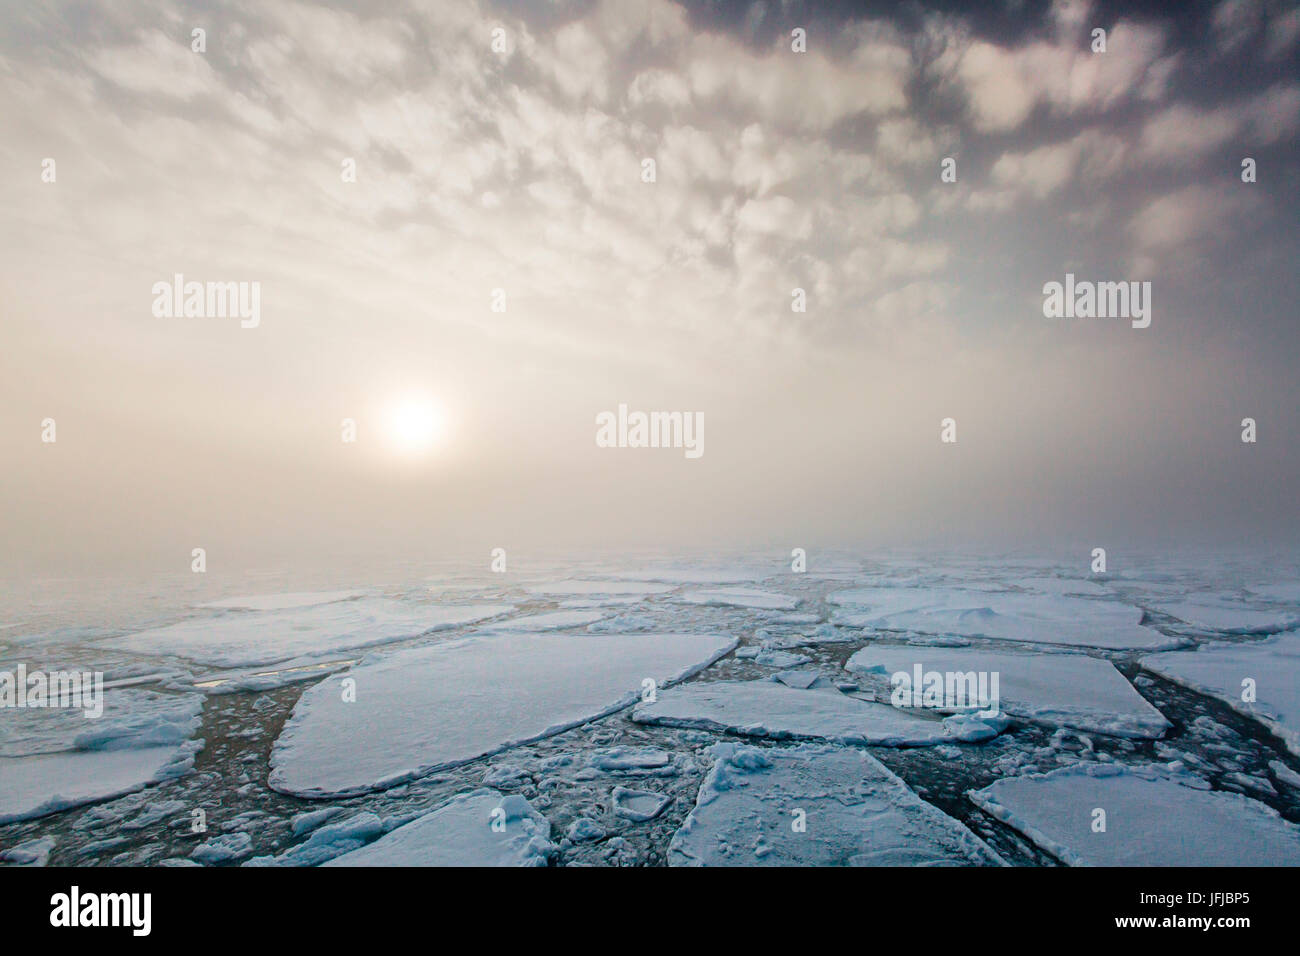 Mist on the pack ice, in the high arctic ocean, north of Spitsbergen, Svalbard islands, Stock Photo